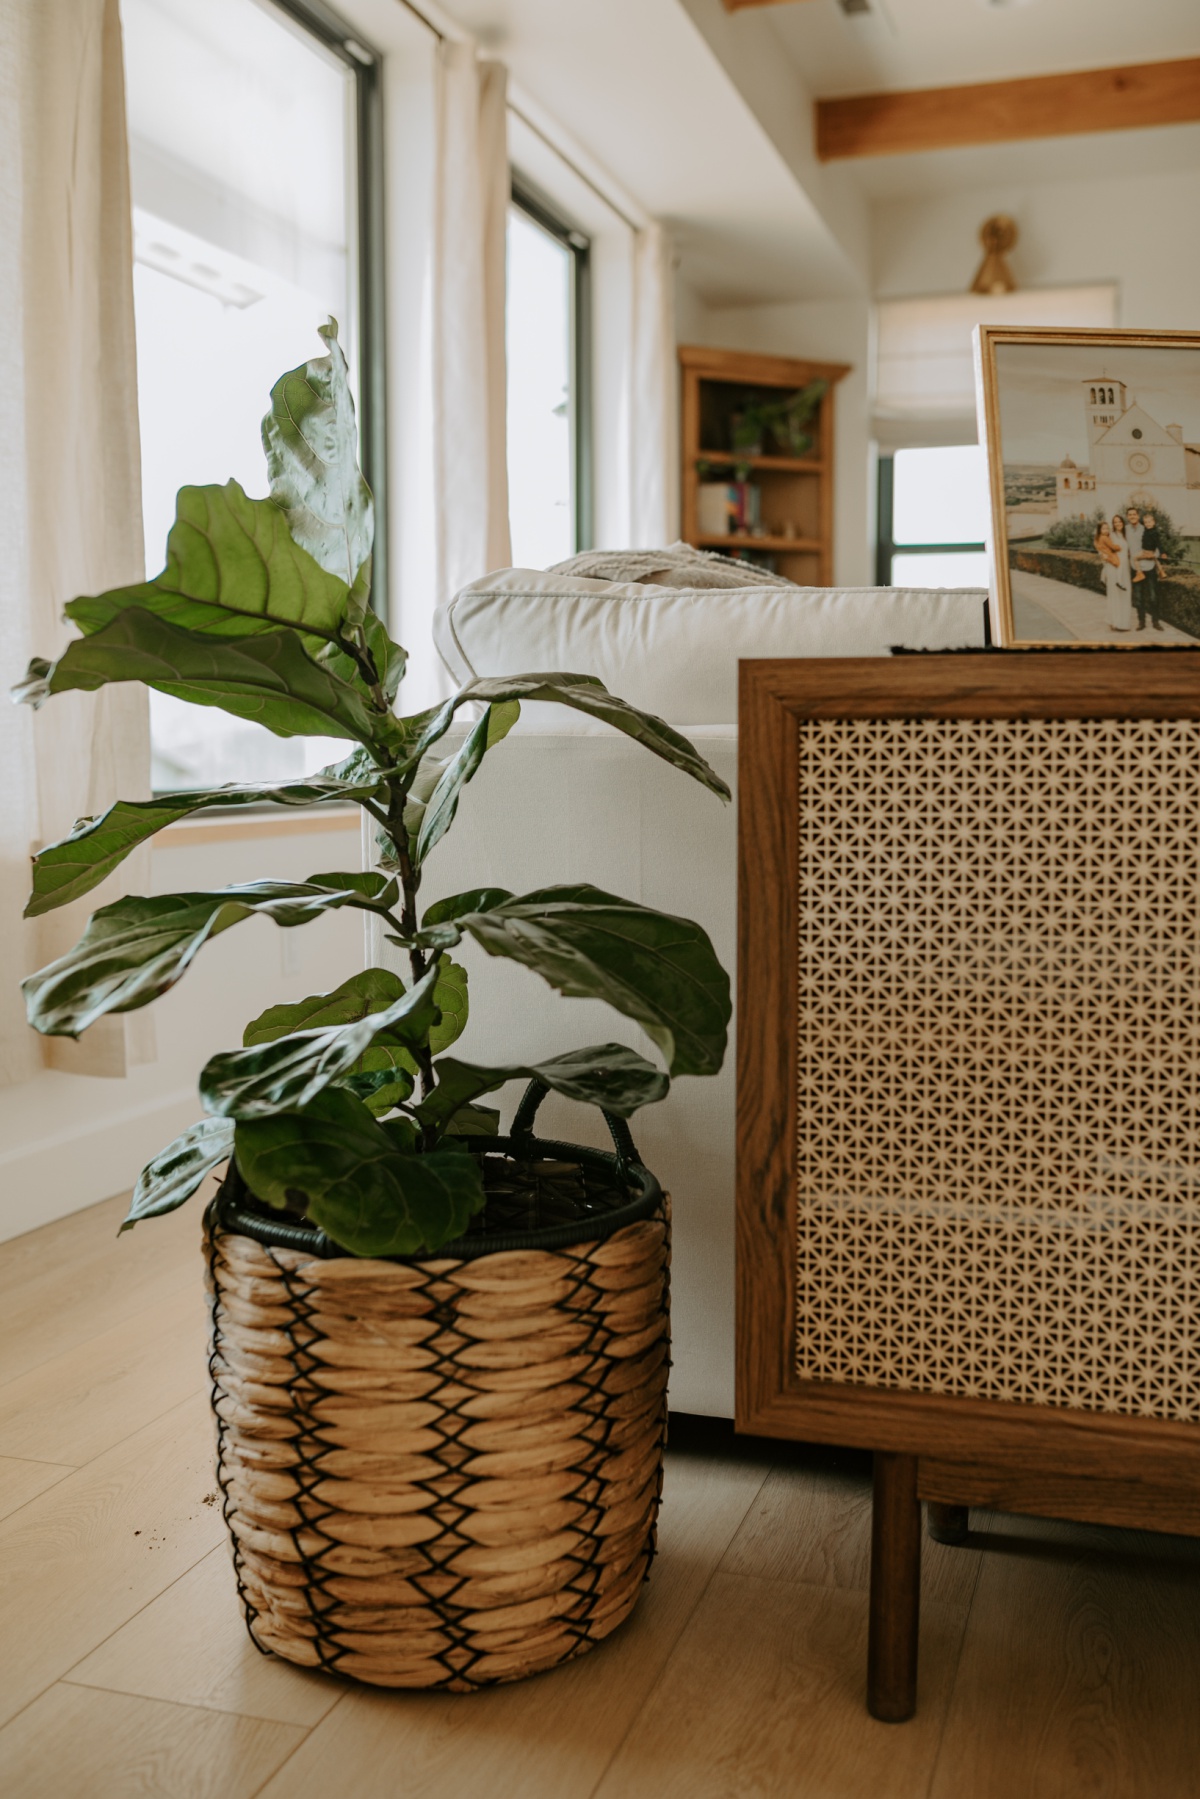 Fiddle leaf fig plant from walmart in a walmart brown woven plant basket